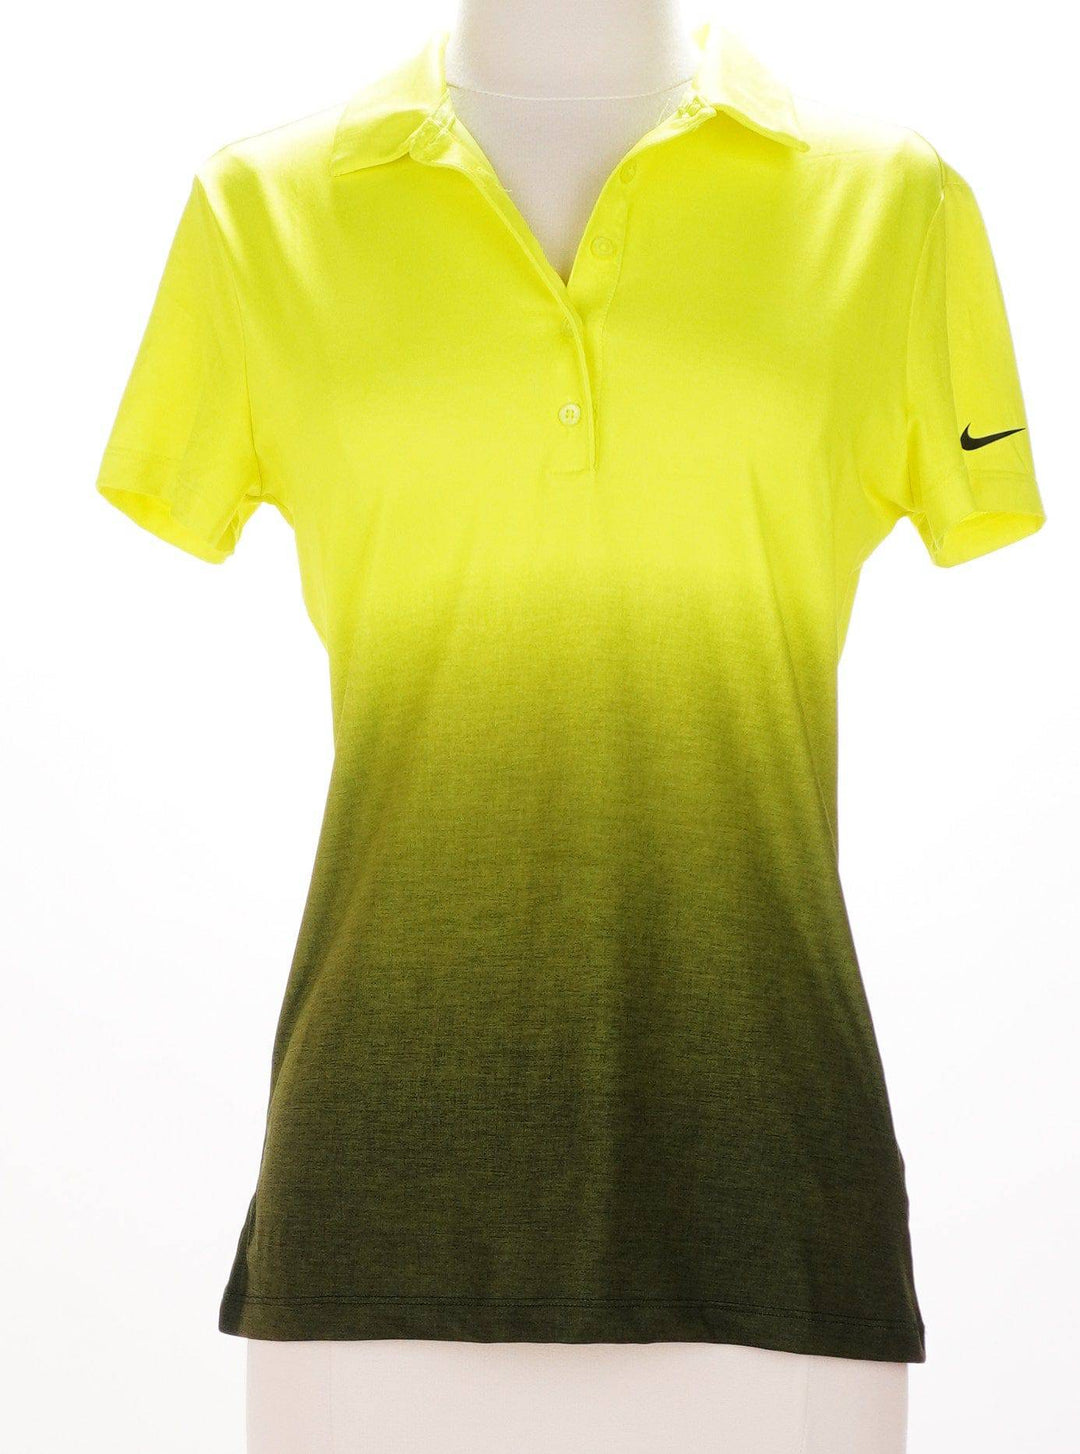 Nike Small / Yellow / Consigned Nike Short Sleeve Golf Shirt - Neon Yellow-Gray - Size Small